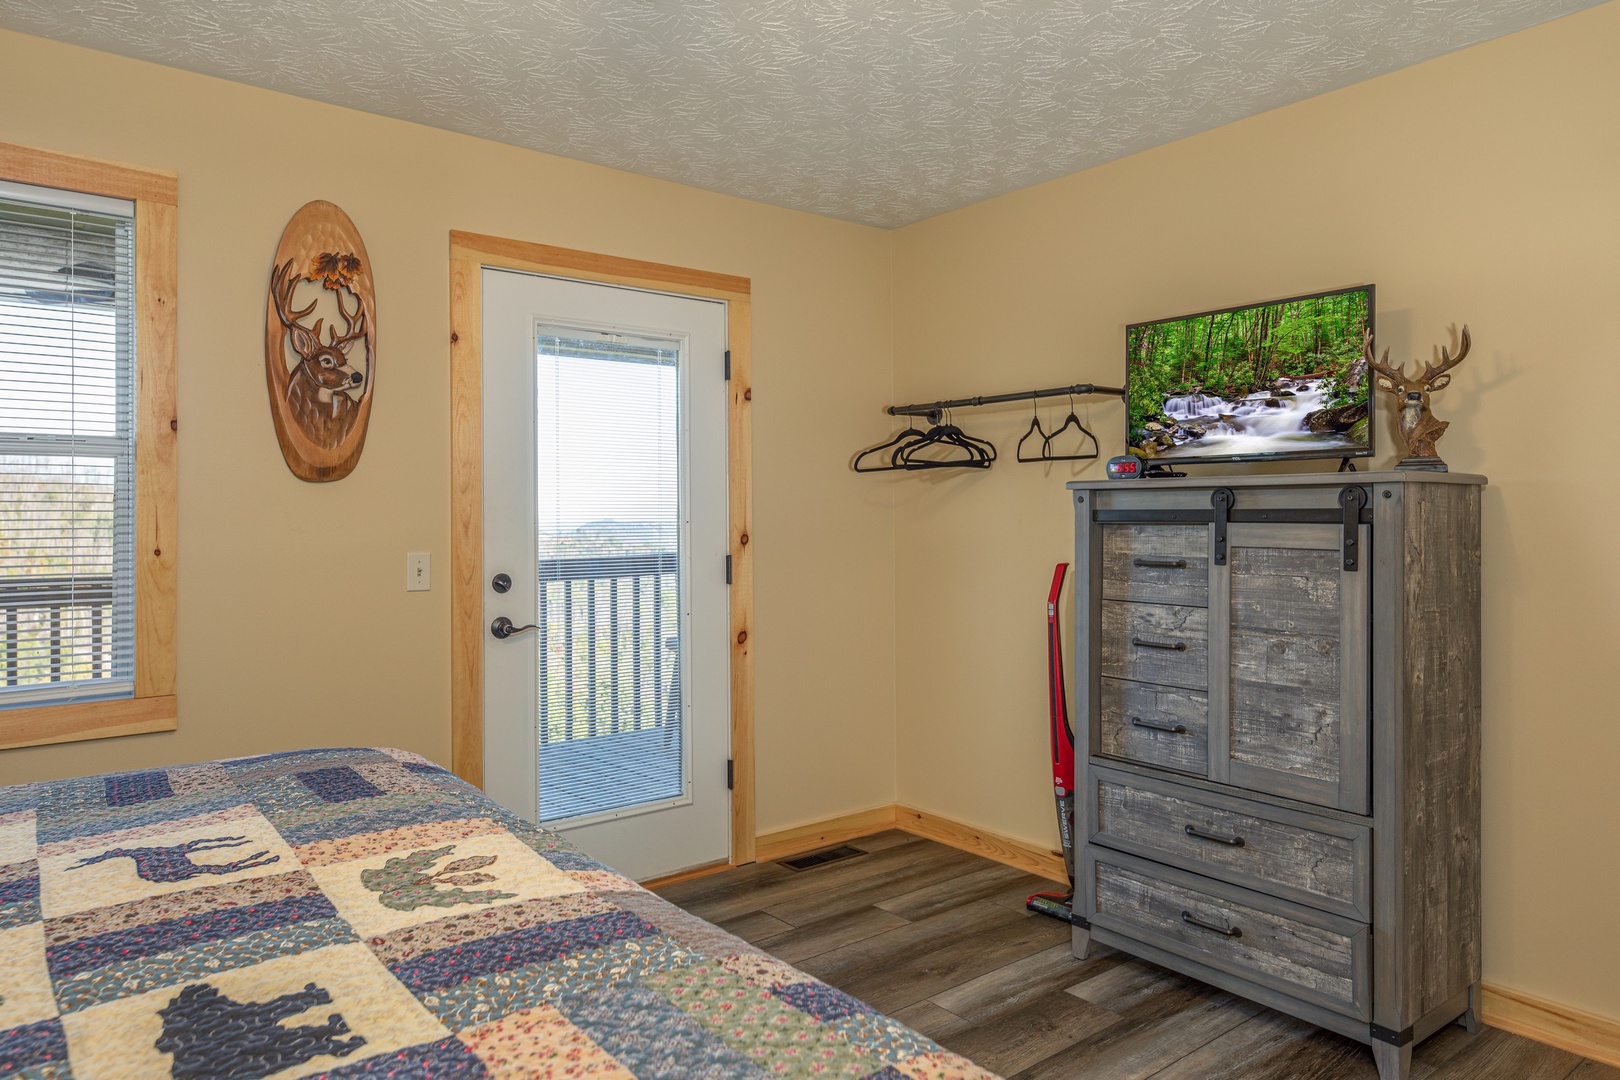 Dresser, TV, and deck access in a bedroom at Le Bear Chalet, a 7 bedroom cabin rental located in Gatlinburg